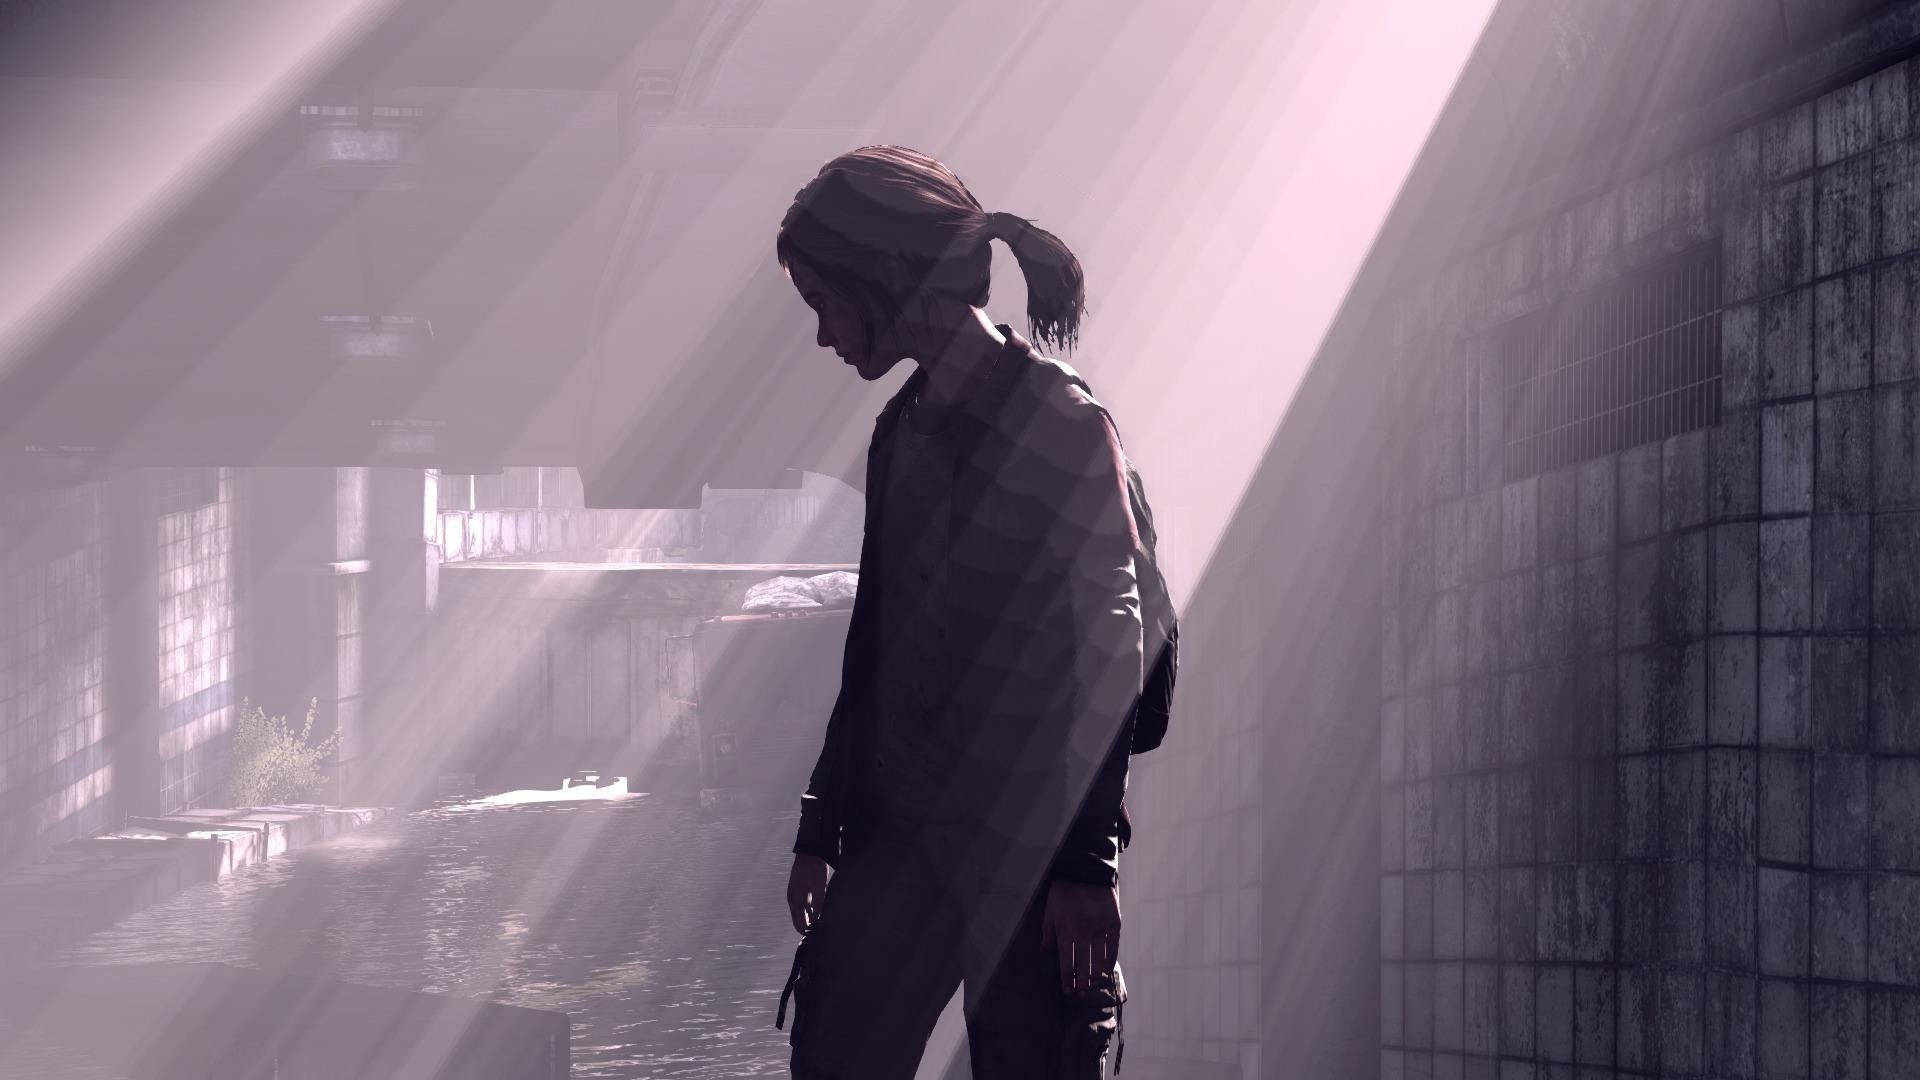 A Silhouette Of Ellie, From The Video Game The Last Of Us. Background